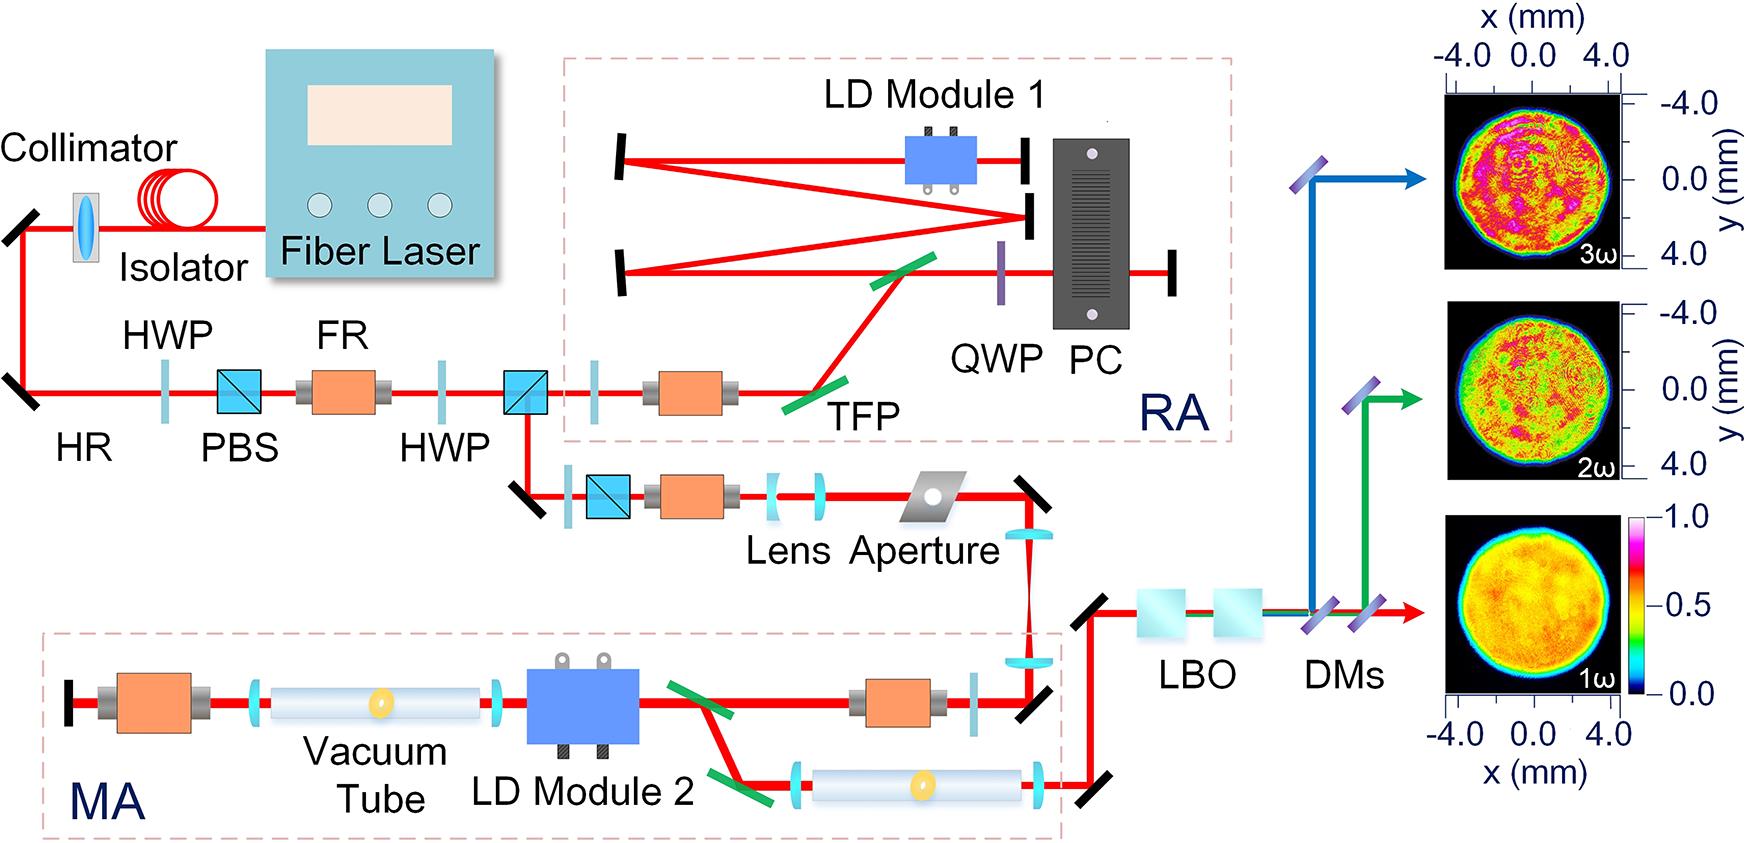 Schematic of the UV laser system and transverse beam profiles of the amplified pulses at 1064 nm (ω), 532 nm (2ω), and 355 nm (3ω) measured at their maximum energies via relay imaging. RA, regenerative amplifier; MA, main amplifier; HR, high reflector; HWP, half-wave plate; PBS, polarization beam splitter; FR, Faraday rotator; TFP, thin-film plate; QWP, quarter-wave plate; PC, Pockels cell; LD, laser diode; DM, dichroic mirror.